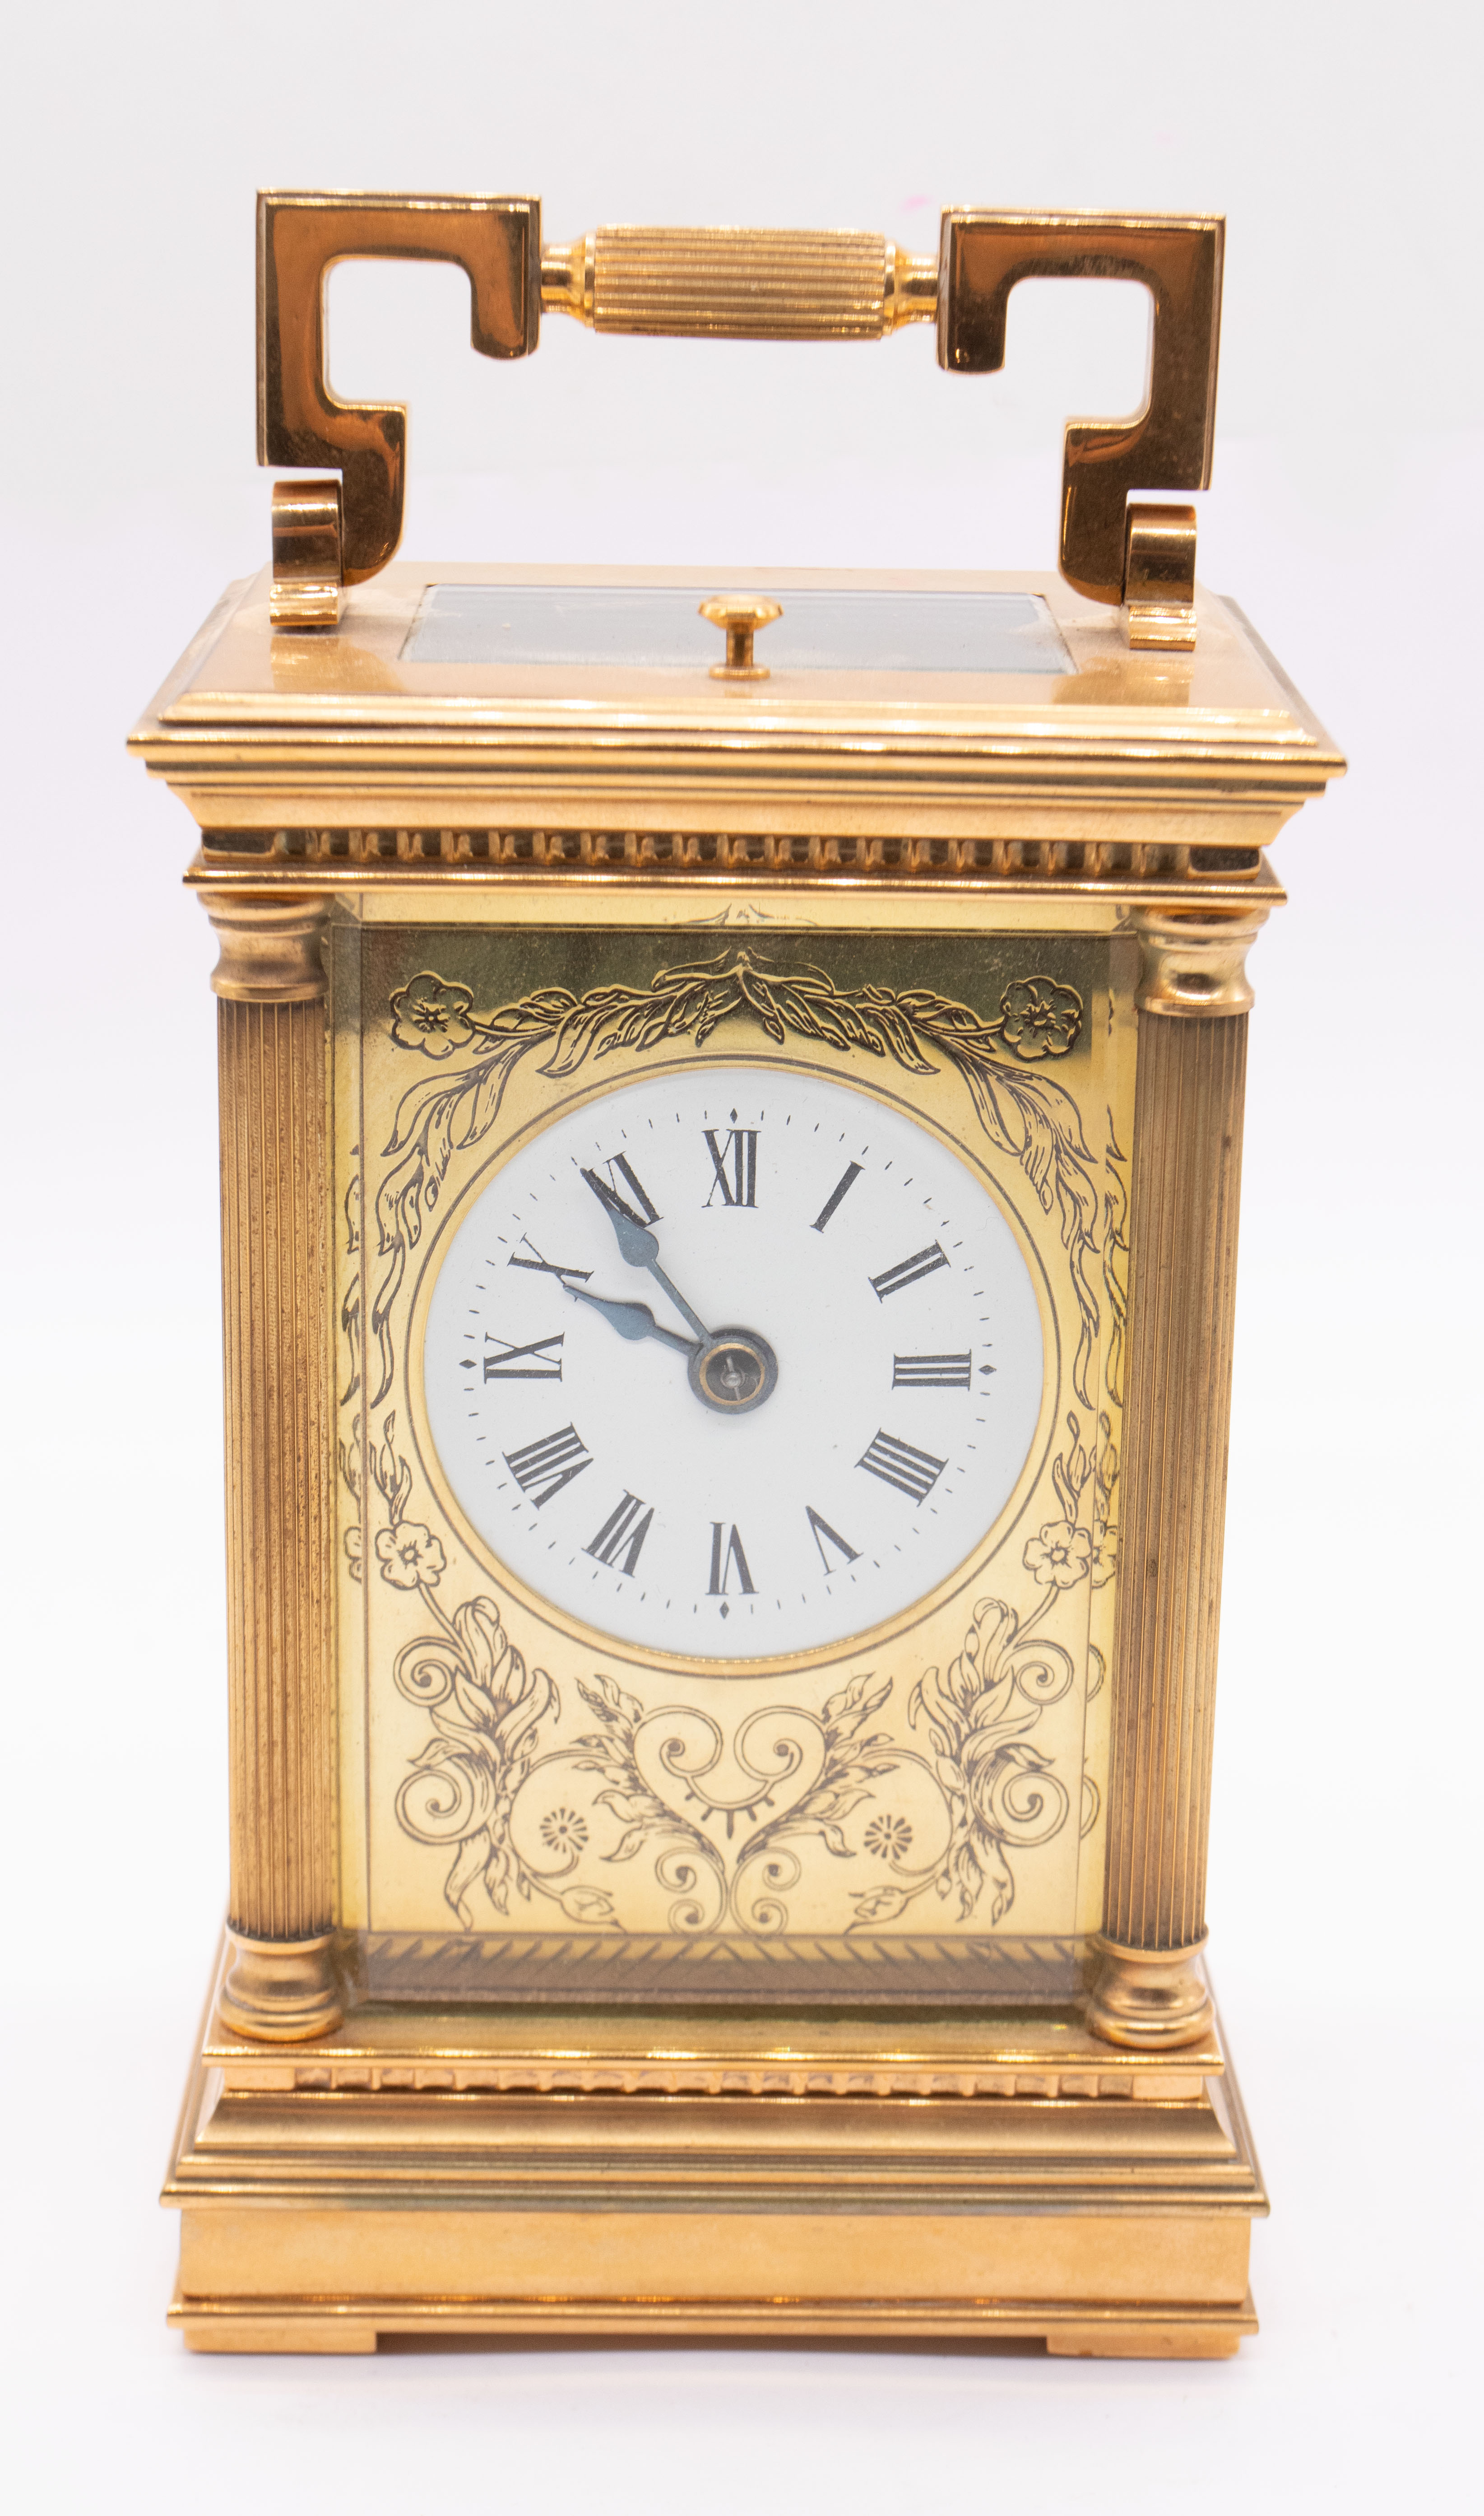 Charles Frodsham London repeating brass carriage clock with eight day two train spring driven - Image 2 of 6